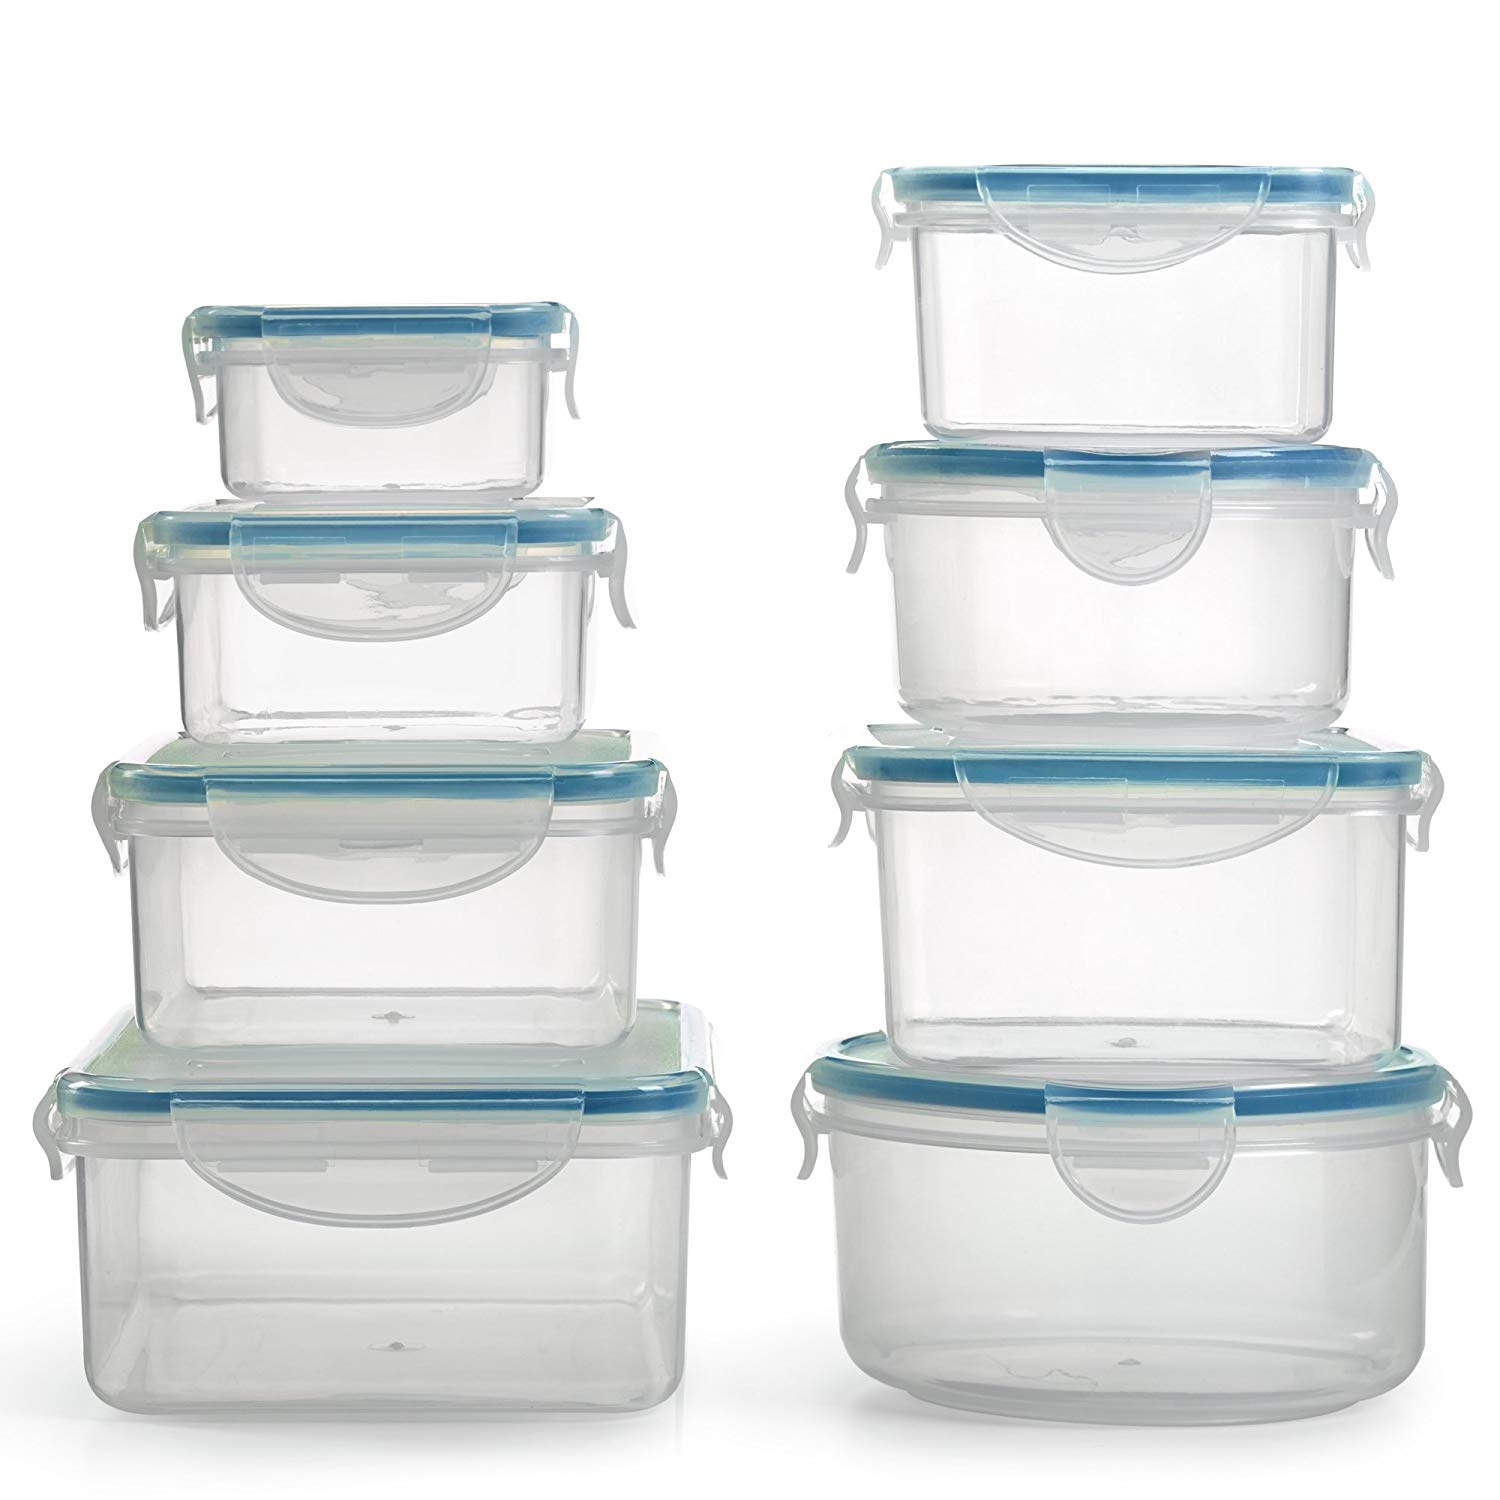 1790 Plastic Food Container Set with Locking Lids